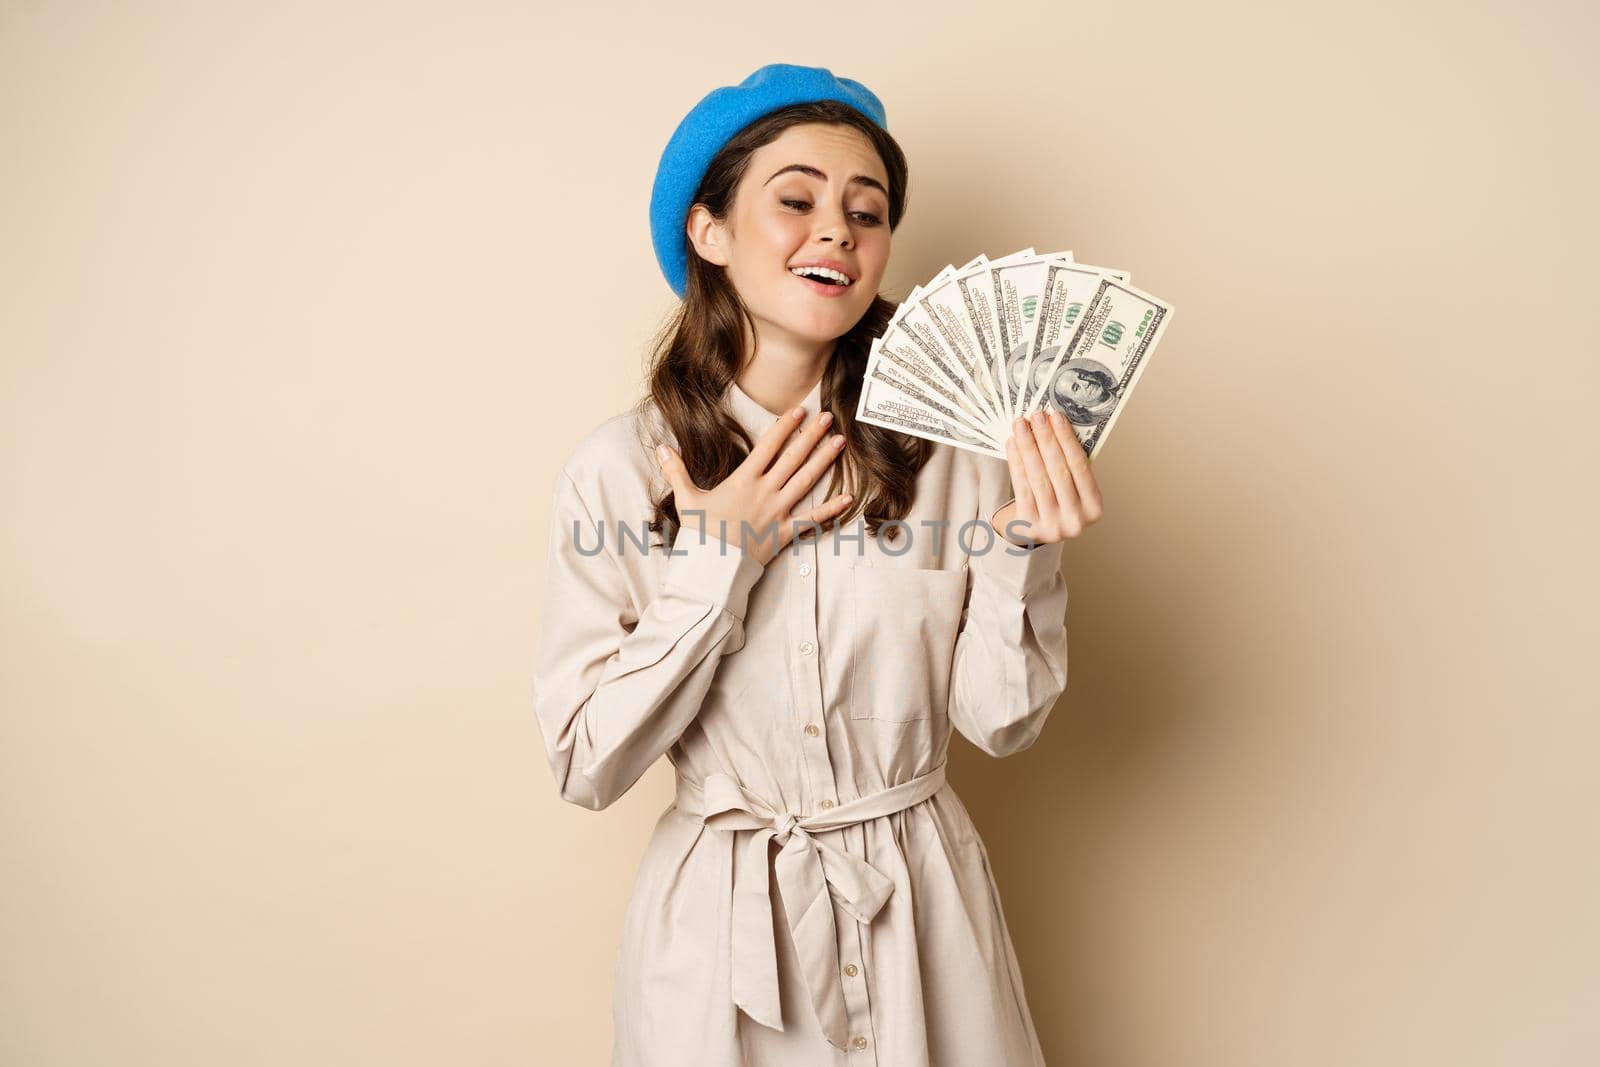 Stylish young woman holding money, cash dollars, smiling and posing satisfied, going on shopping, standing over beige background.